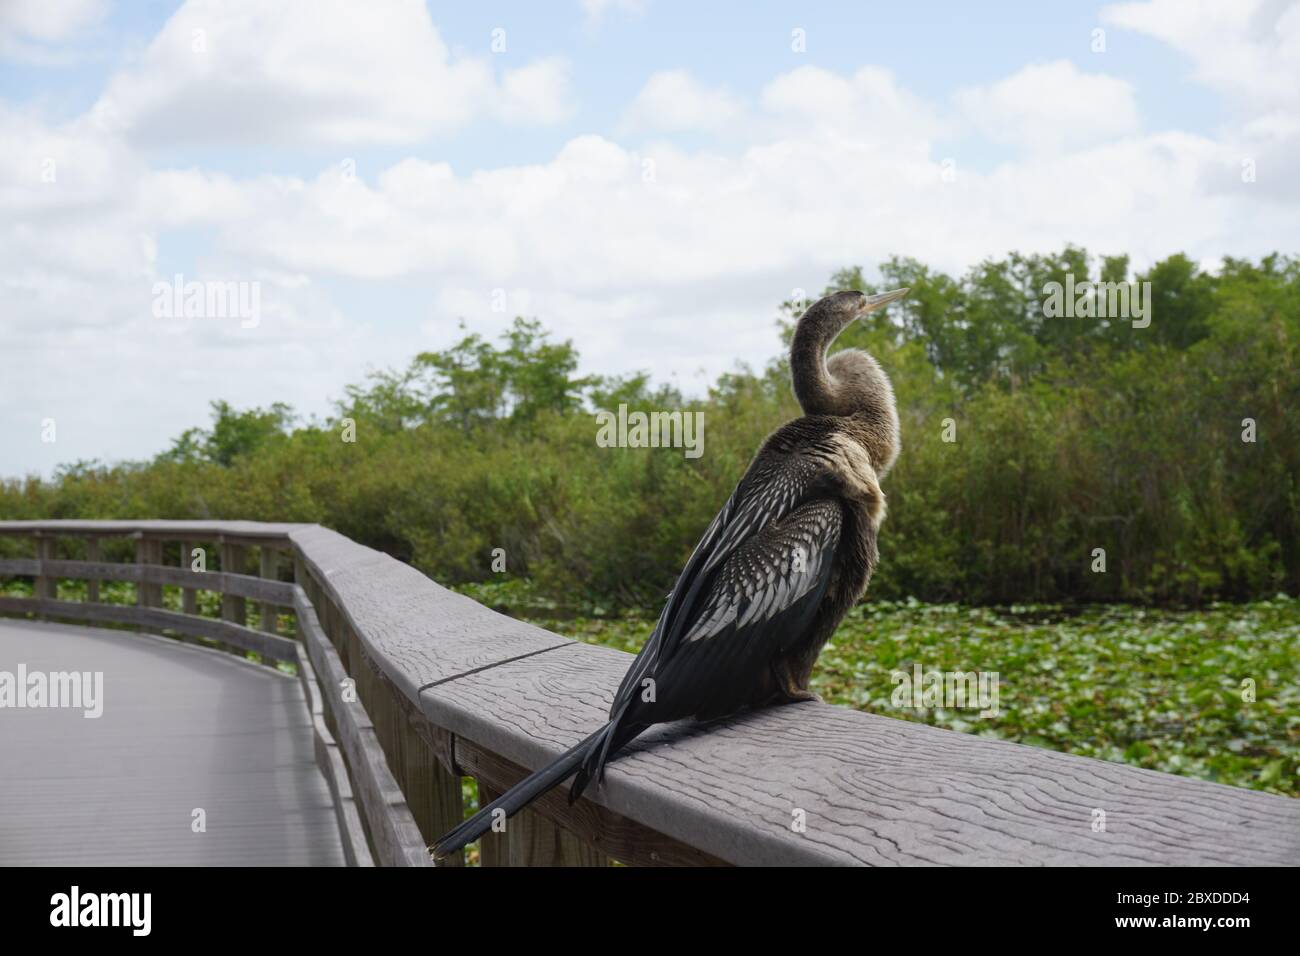 Anhinga Bird sitting on the edge of a boardwalk in the Everglades National Park, Summer 2019. Stock Photograph Stock Photo